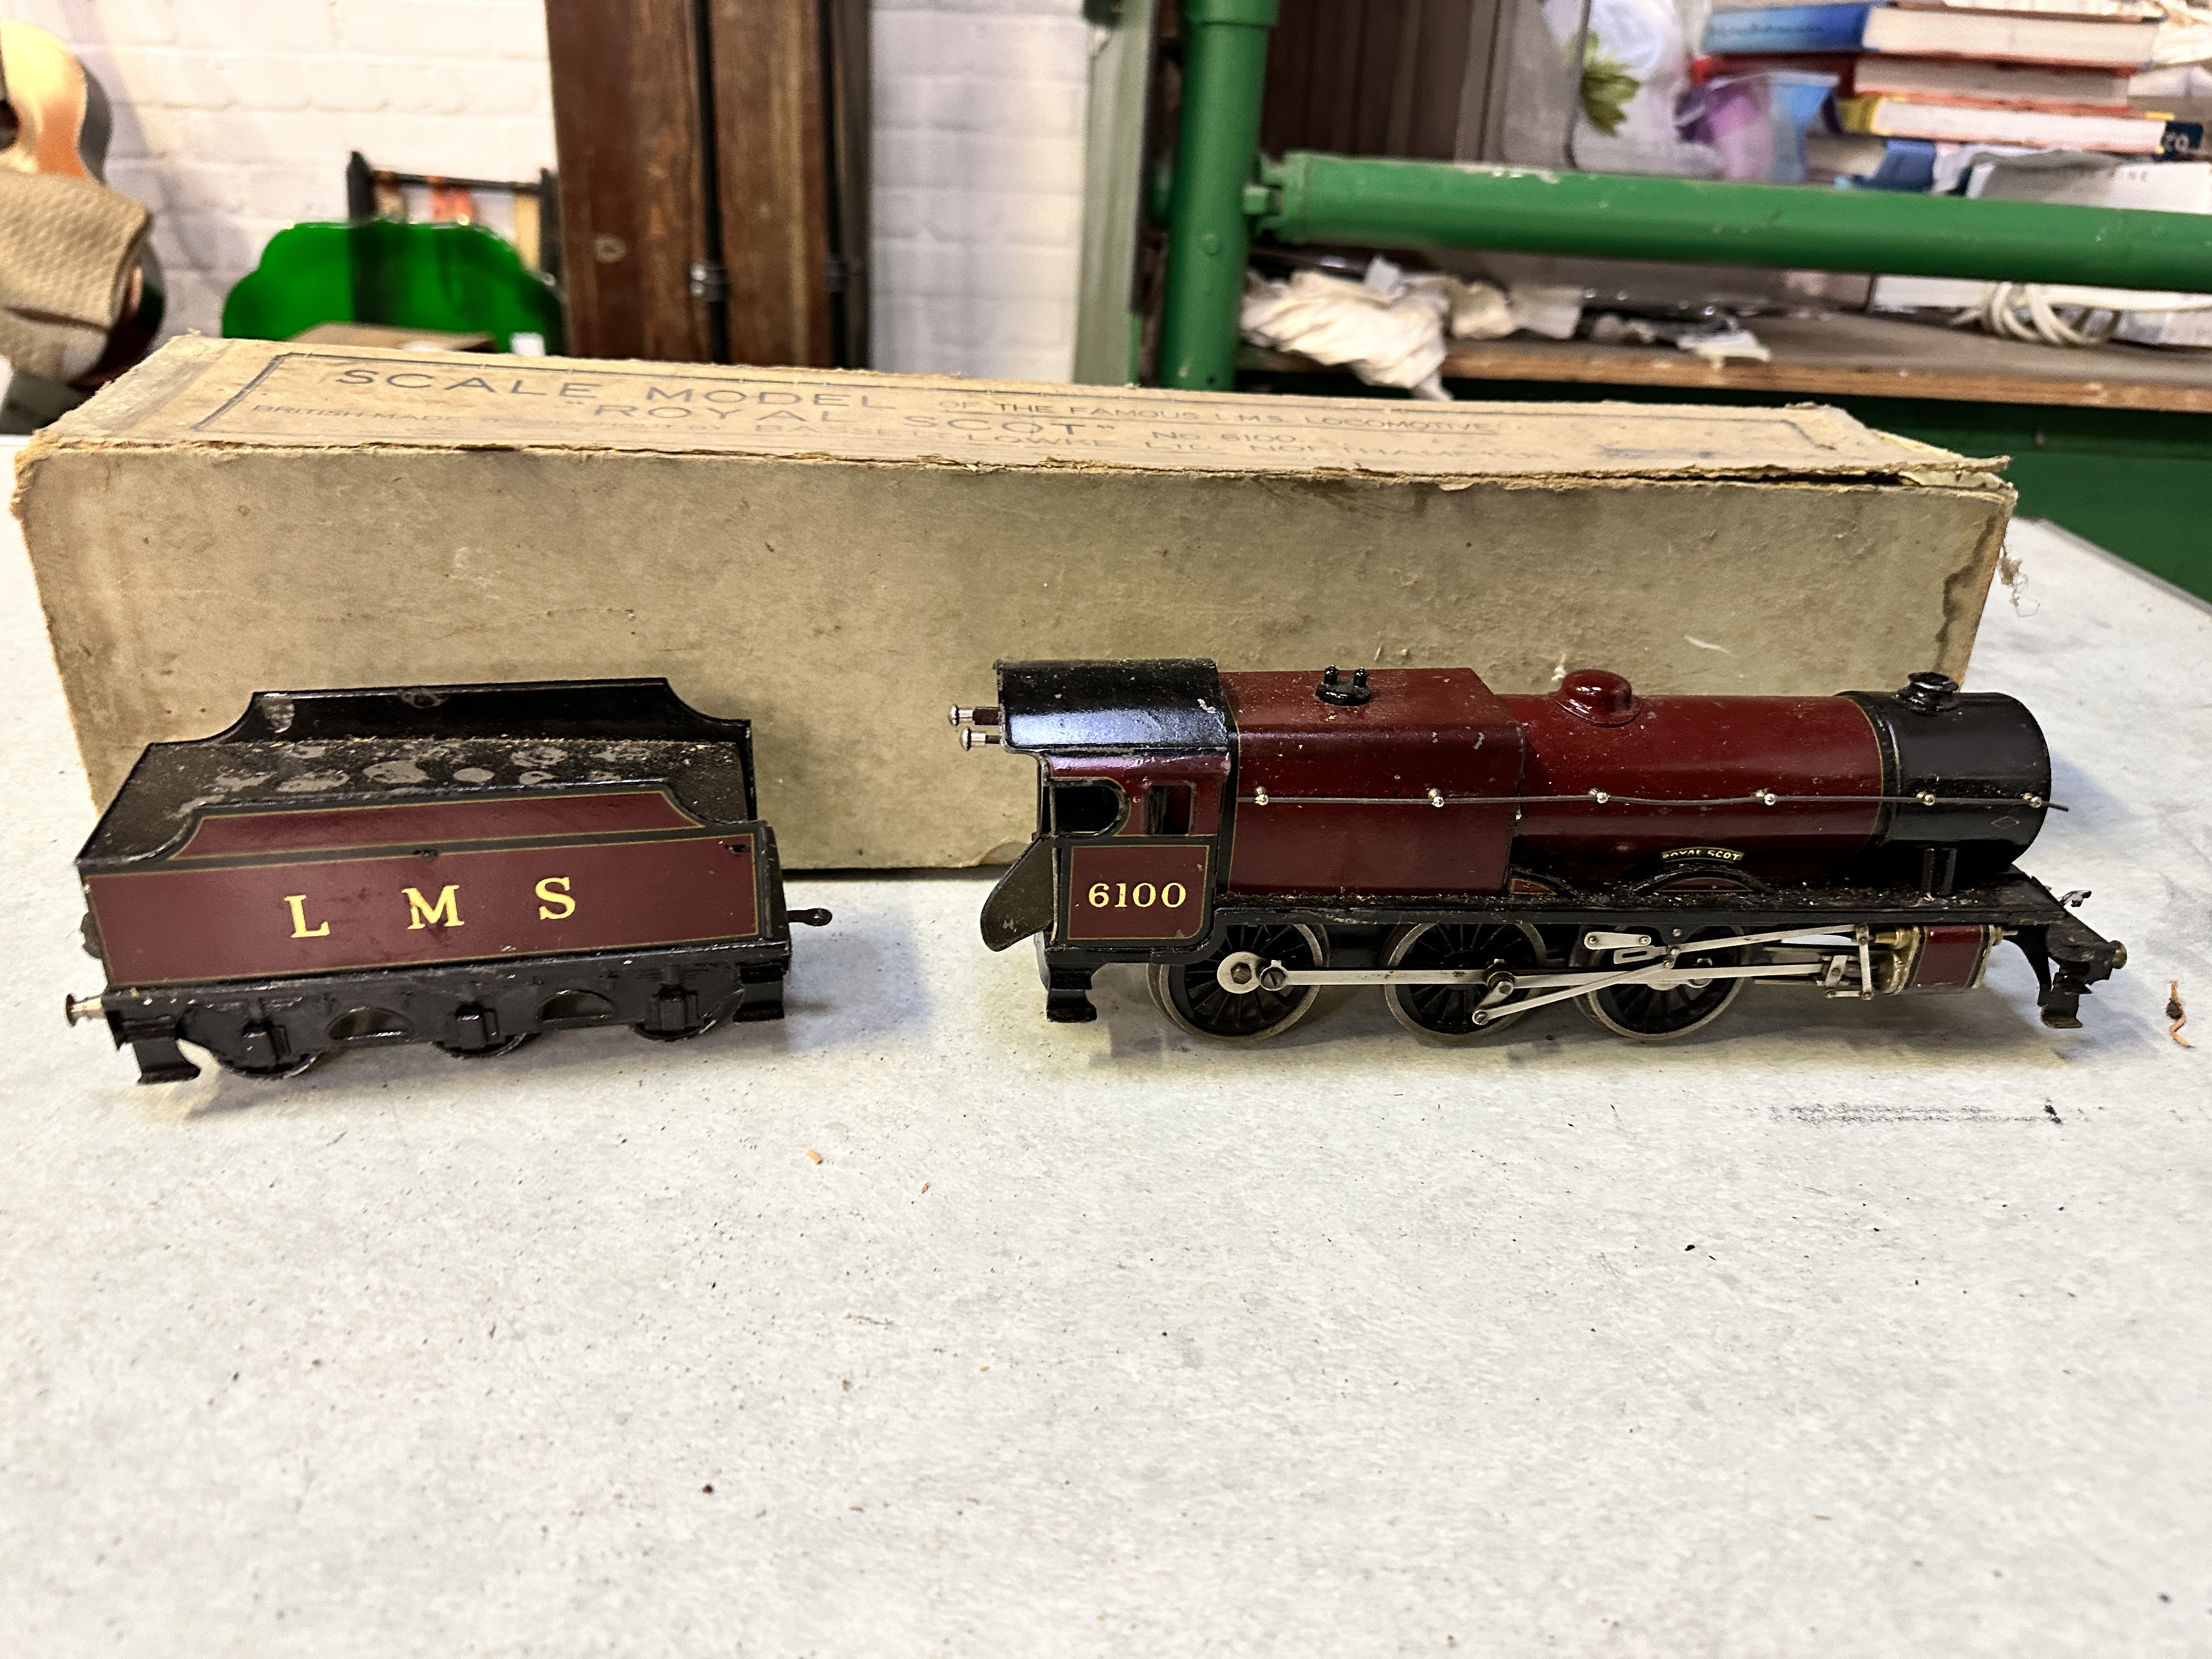 Scale model of the Royal Scot locomotive 6100